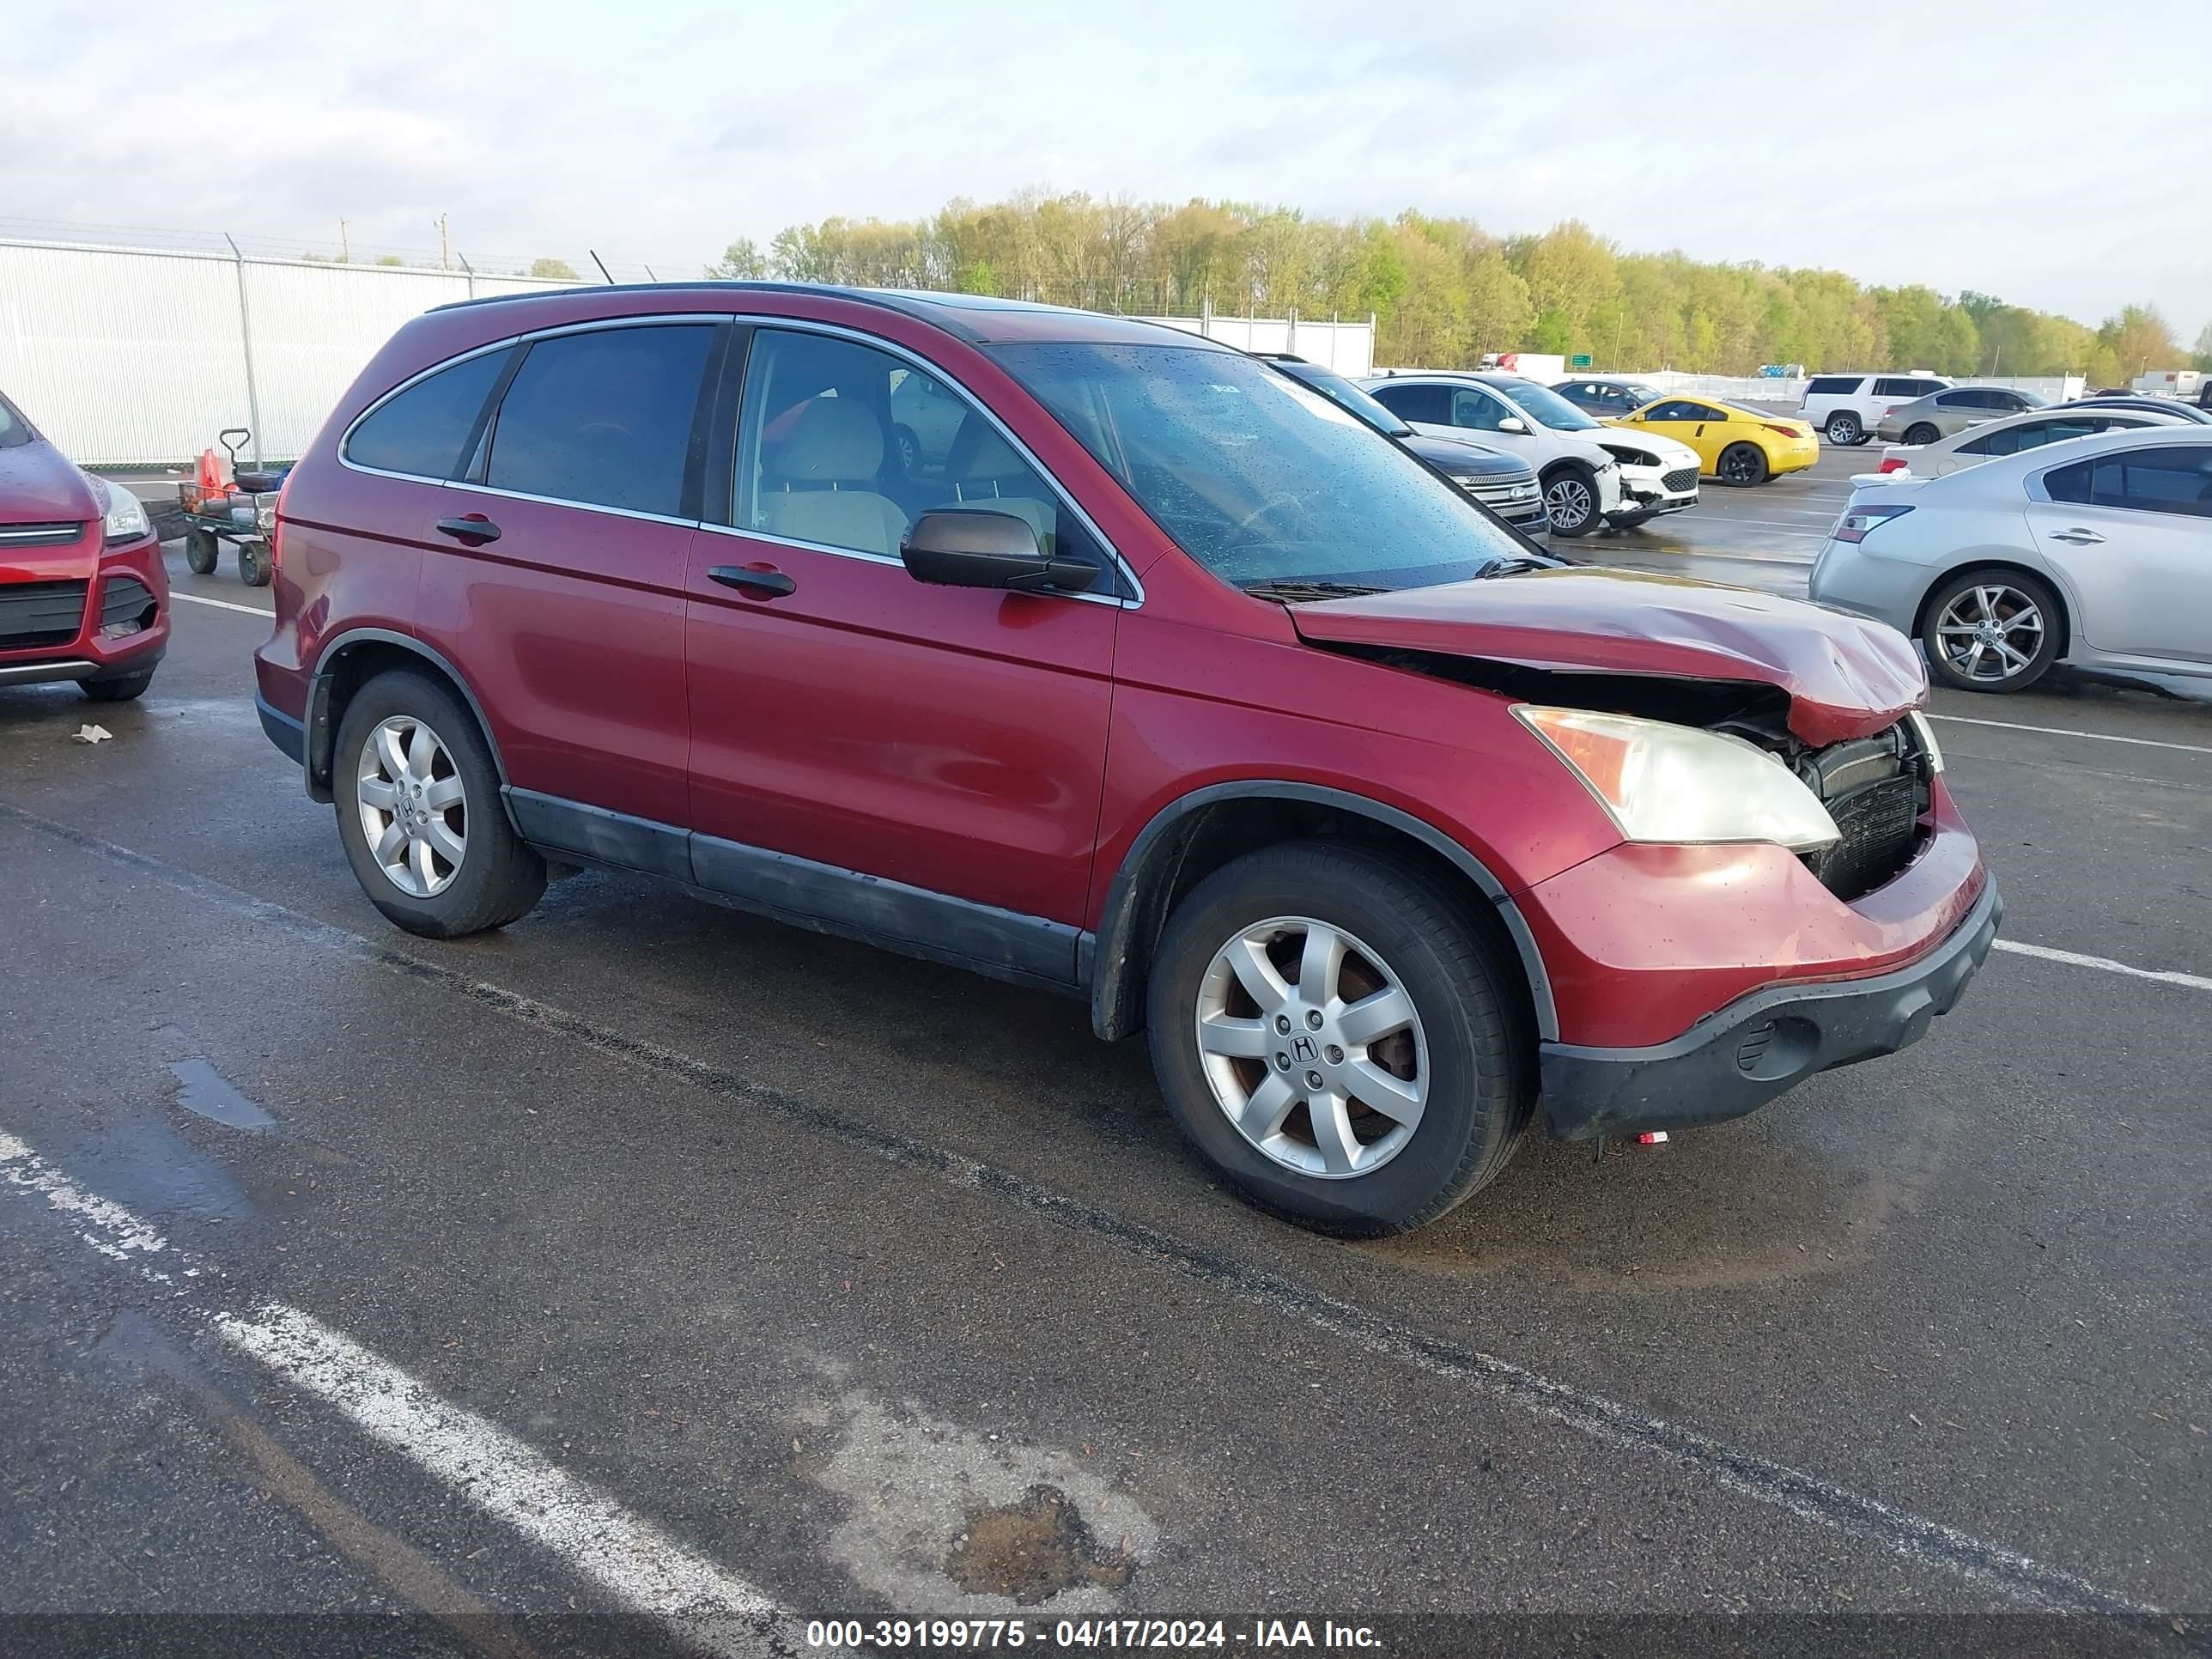 vin: 5J6RE48539L019079 5J6RE48539L019079 2009 honda cr-v 2400 for Sale in 47229, 1947 S County Rd Scr, Crothersville, Indiana, USA